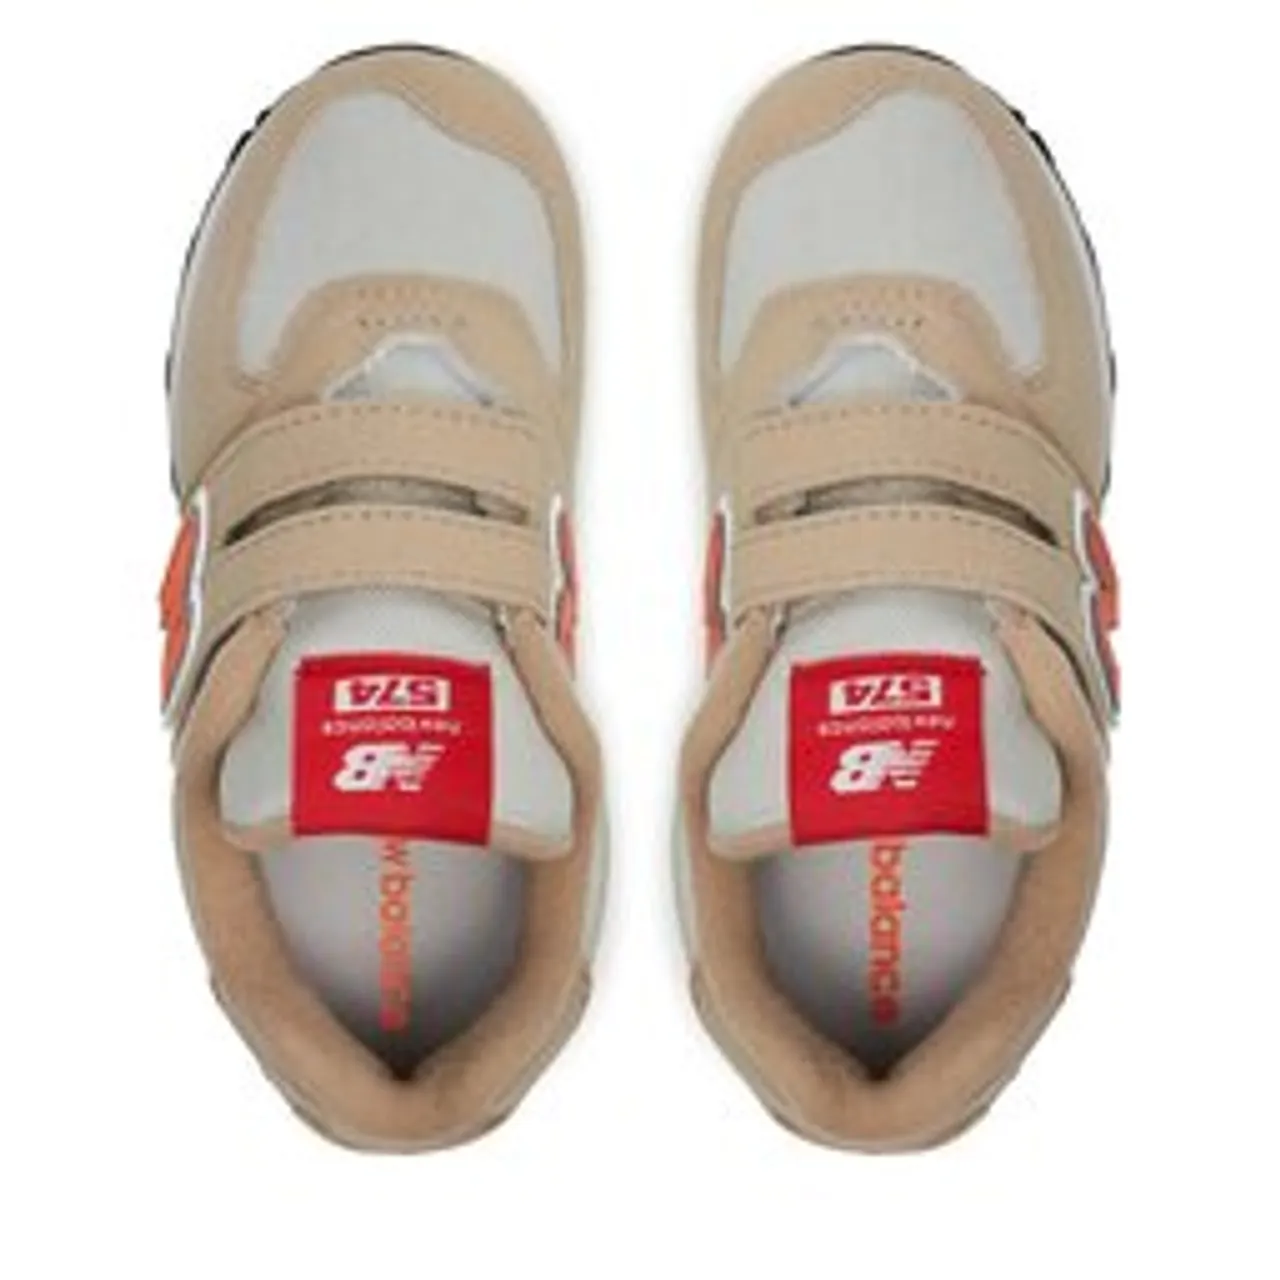 Sneakers New Balance PV574HBO Beige